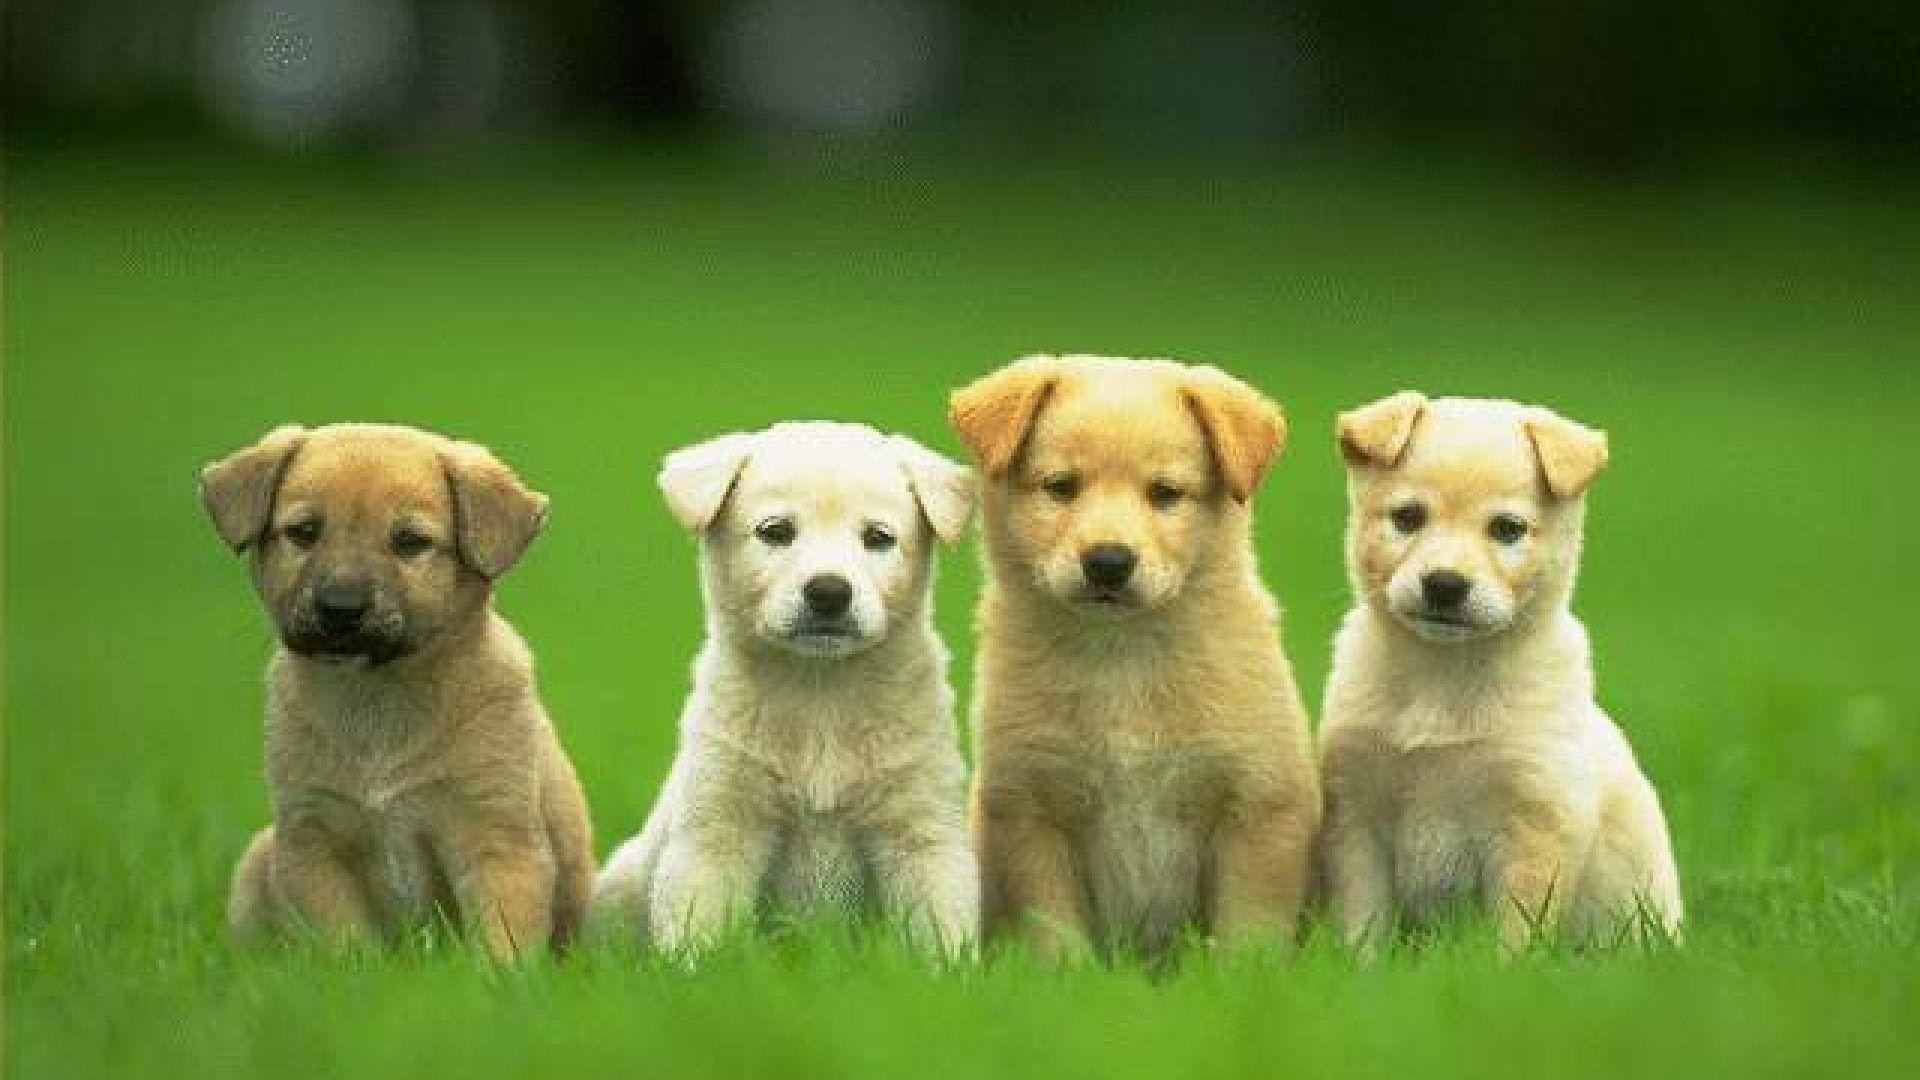 1920x1080 cute and funny puppies small dog wallpaper wallpaper - Animal .